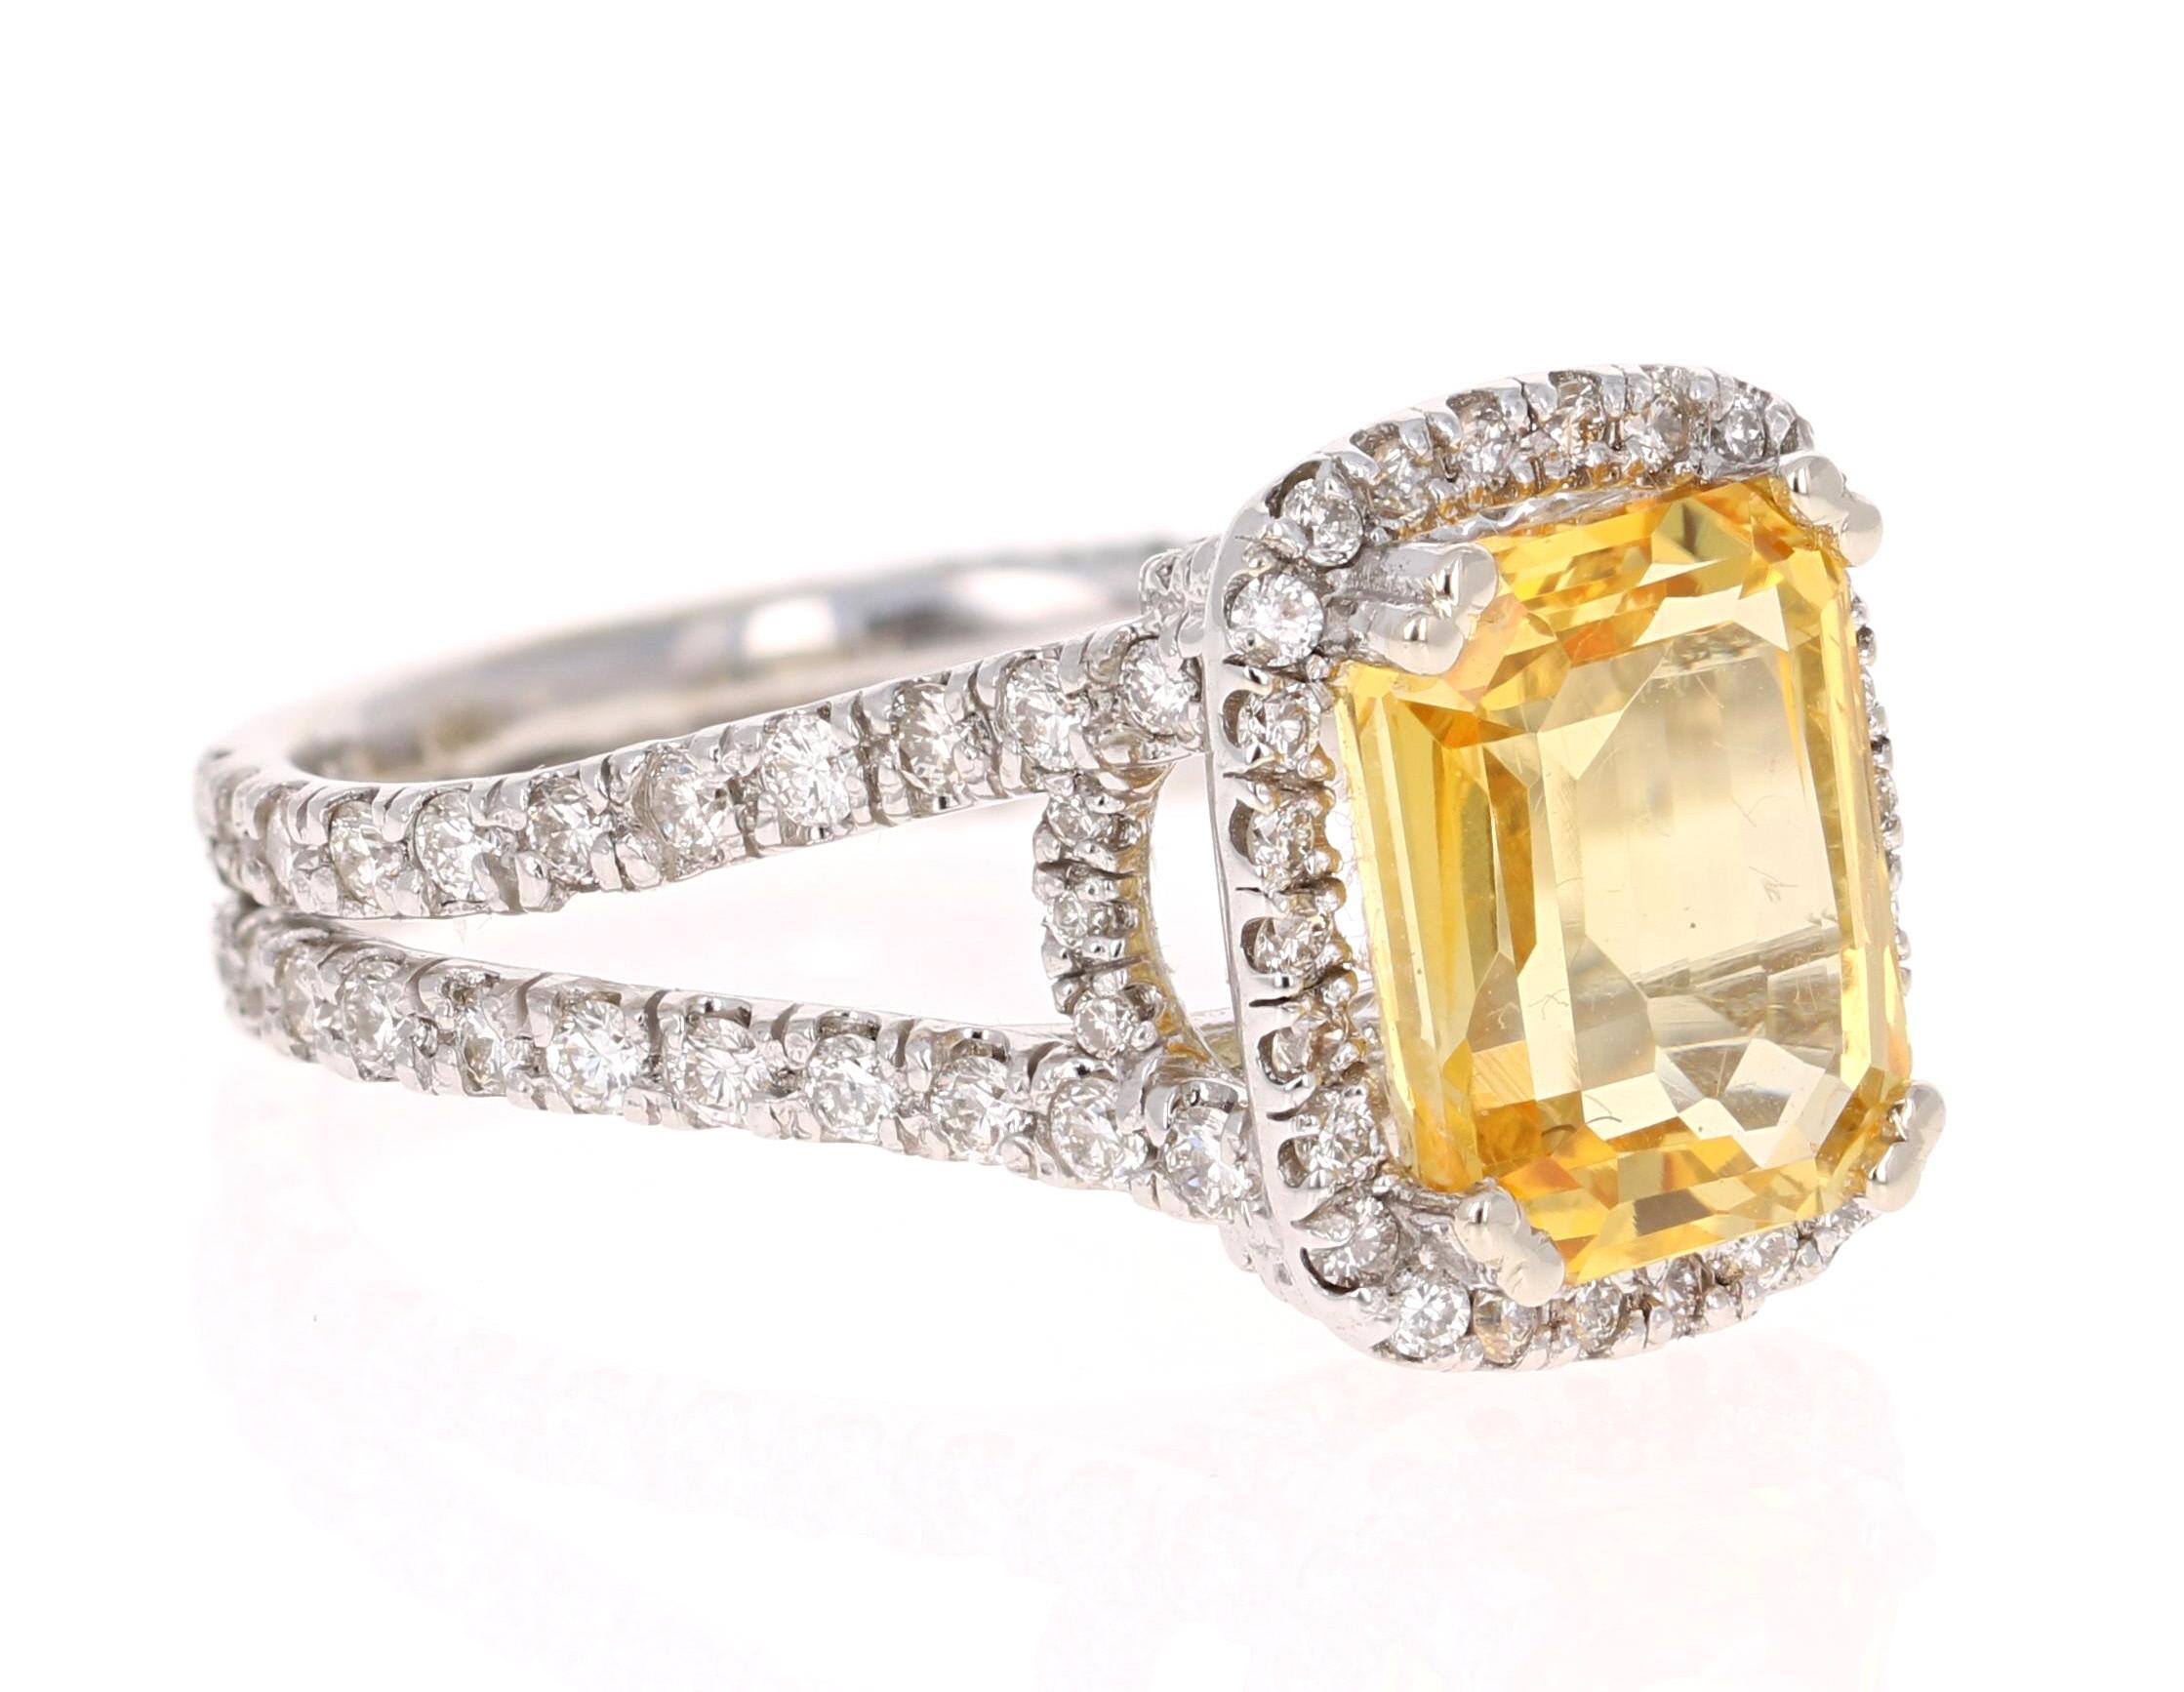 Stunning Yellow Sapphire Non-Heated GIA Certified Ring! 

This ring has a Octagonal Shape, Step Cut Yellow Sapphire that is GIA Certified and weighs 5.28 Carats. 
GIA Certificate number is: 2115570612. The Yellow Sapphire is natural and is a